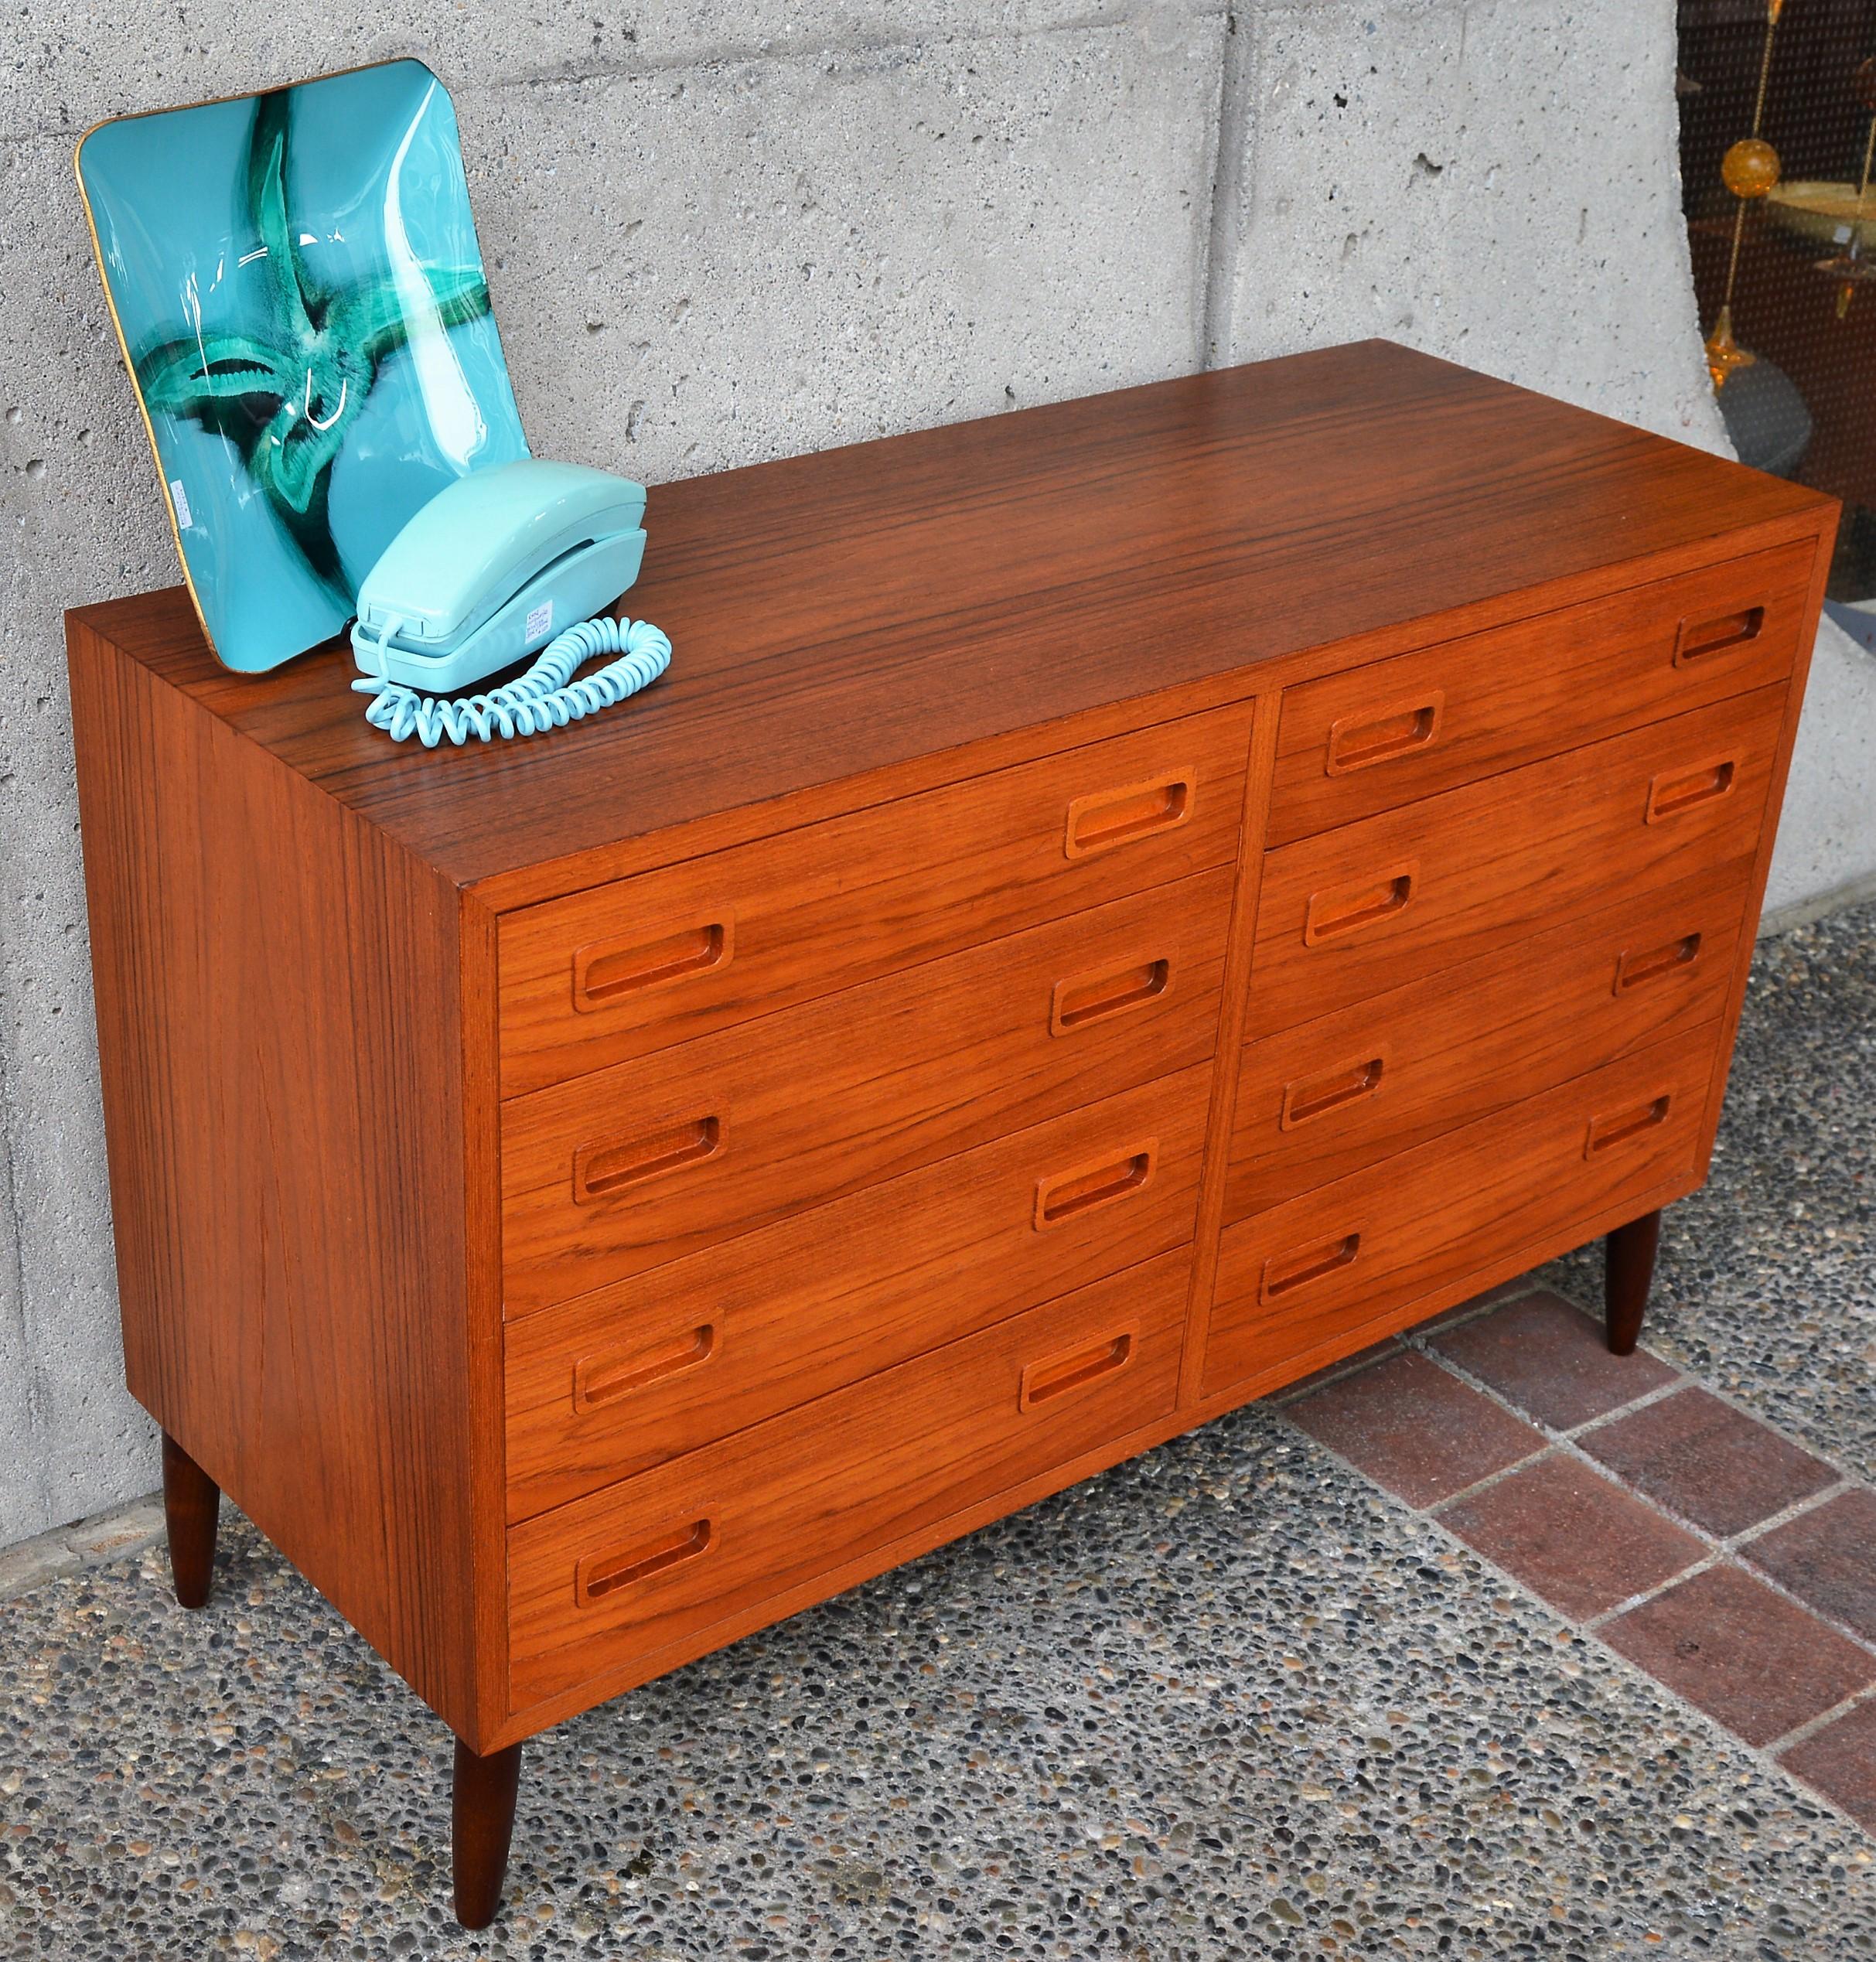 Mid-Century Modern Quality Danish Teak Compact Dresser/Chest of Drawers with Legs by Hundevad & Co For Sale